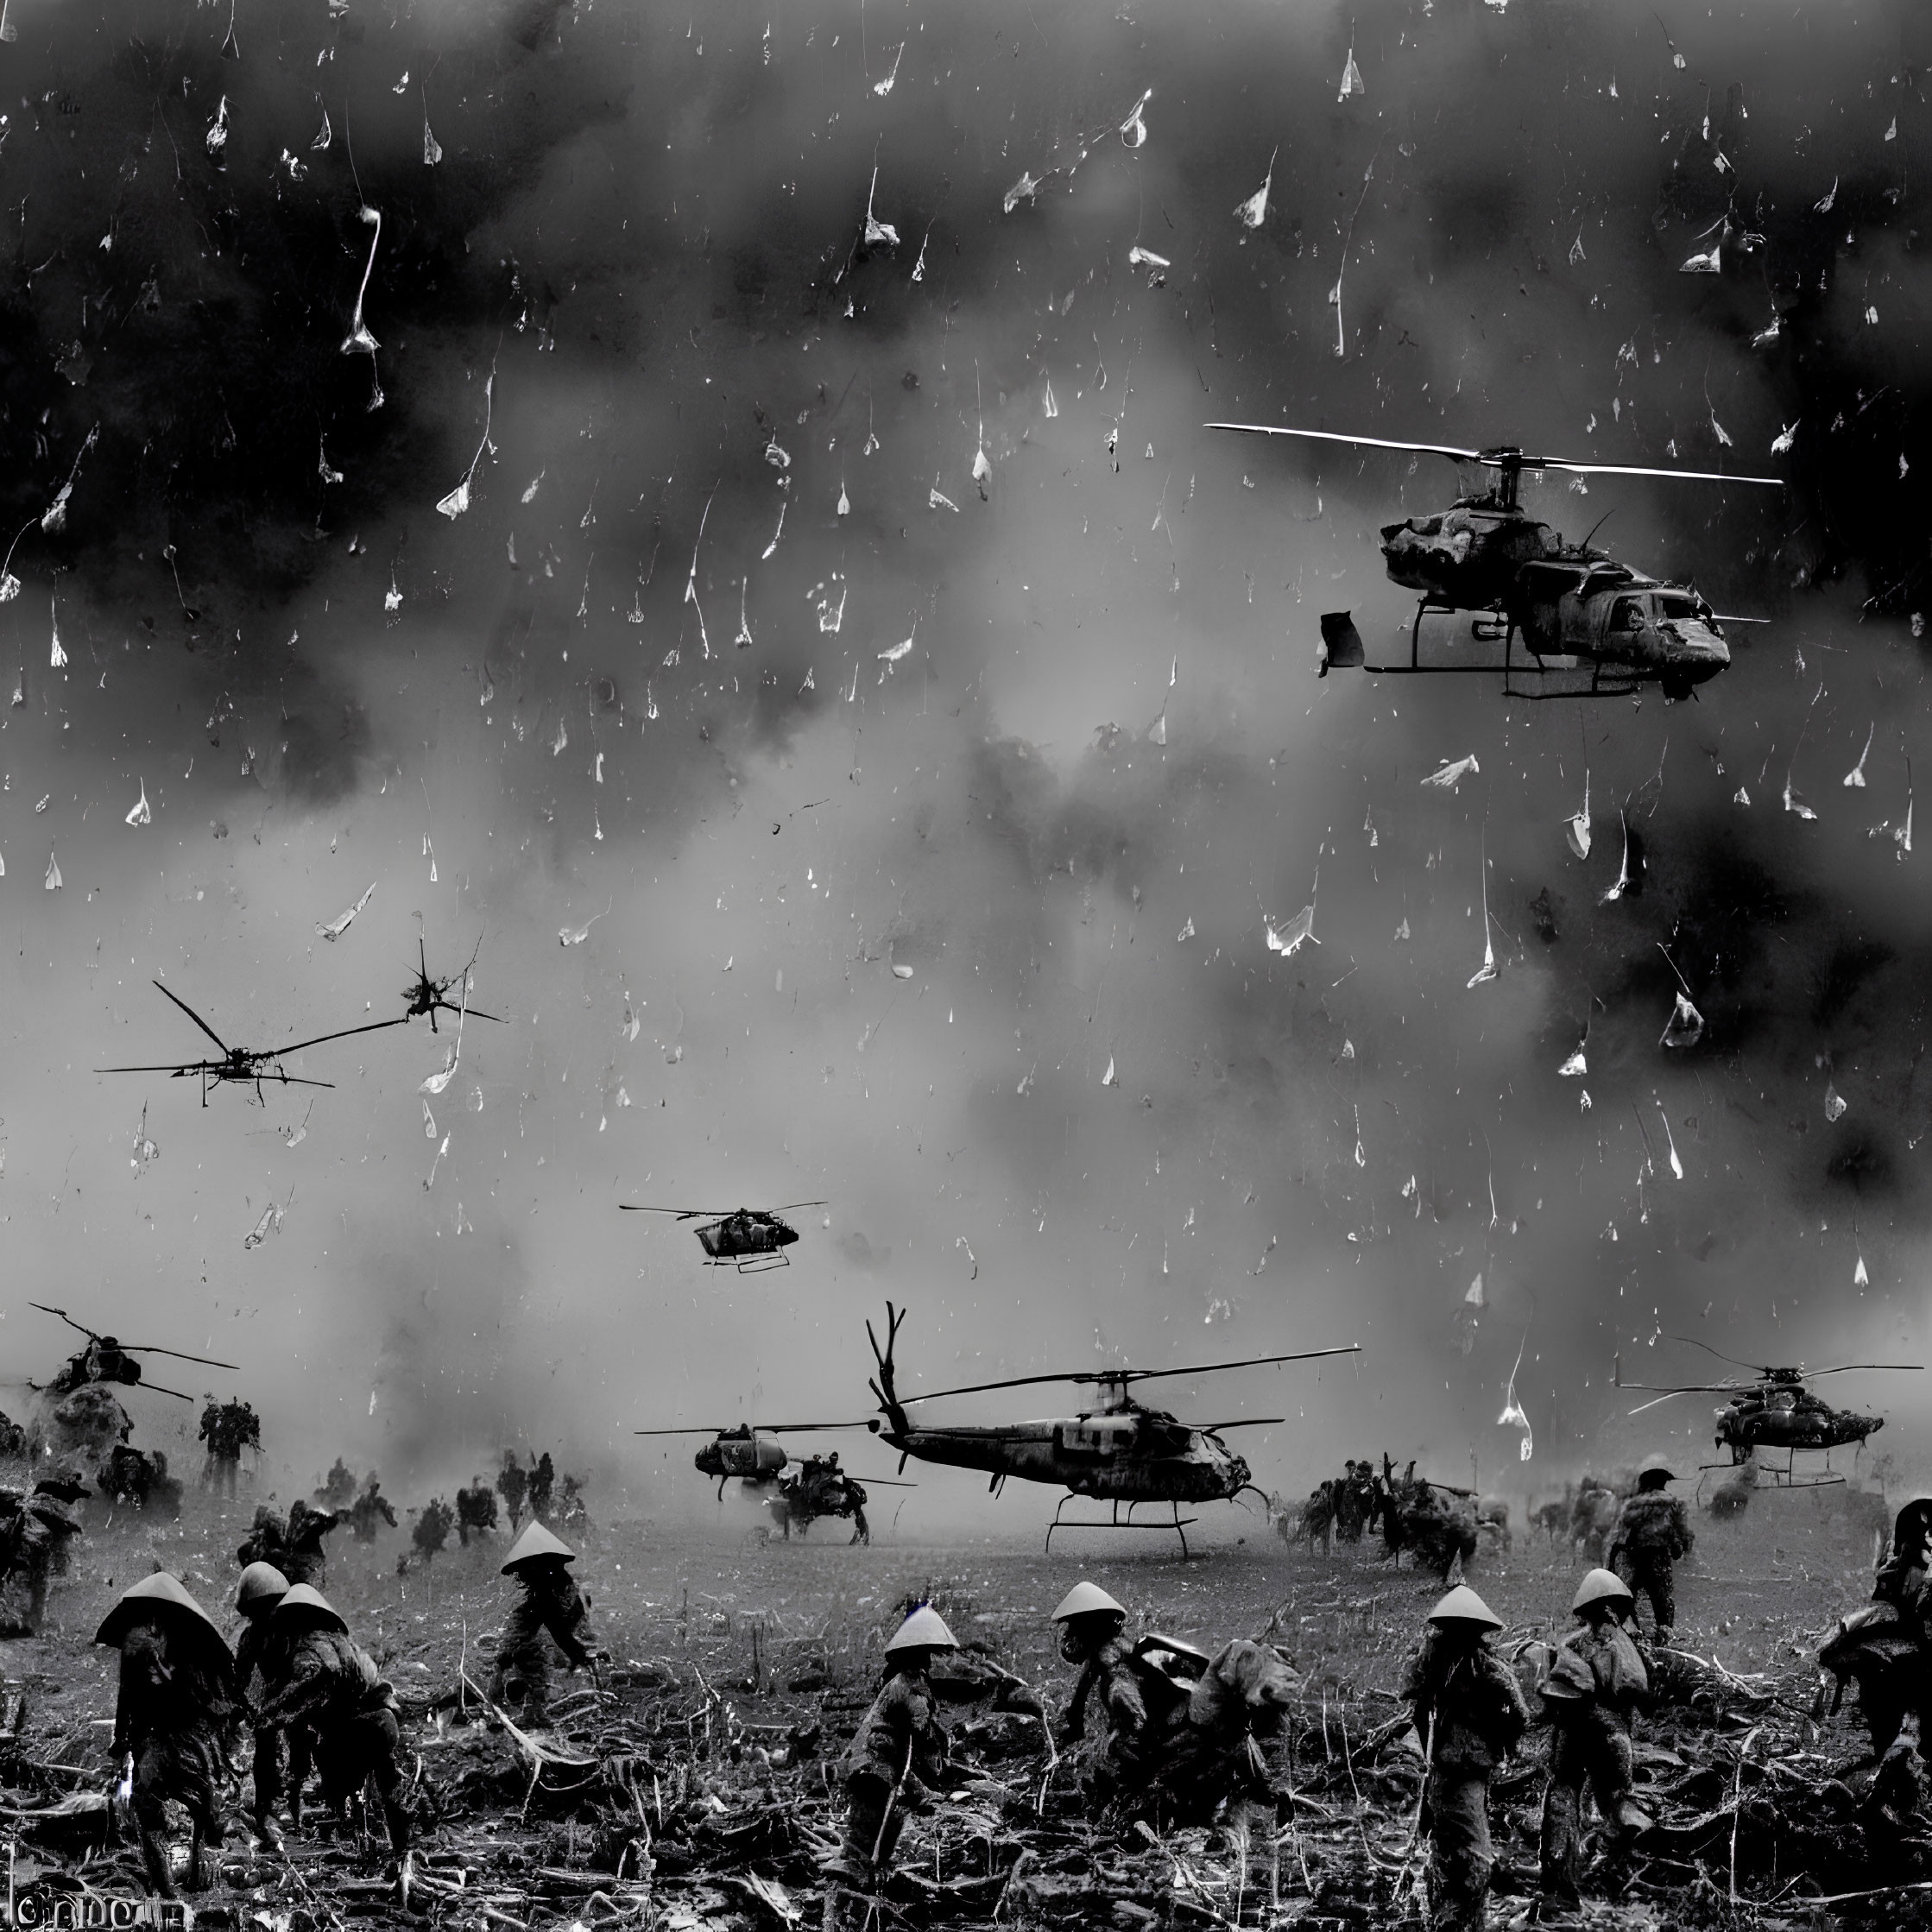 Monochrome battle scene with soldiers, debris, and helicopters